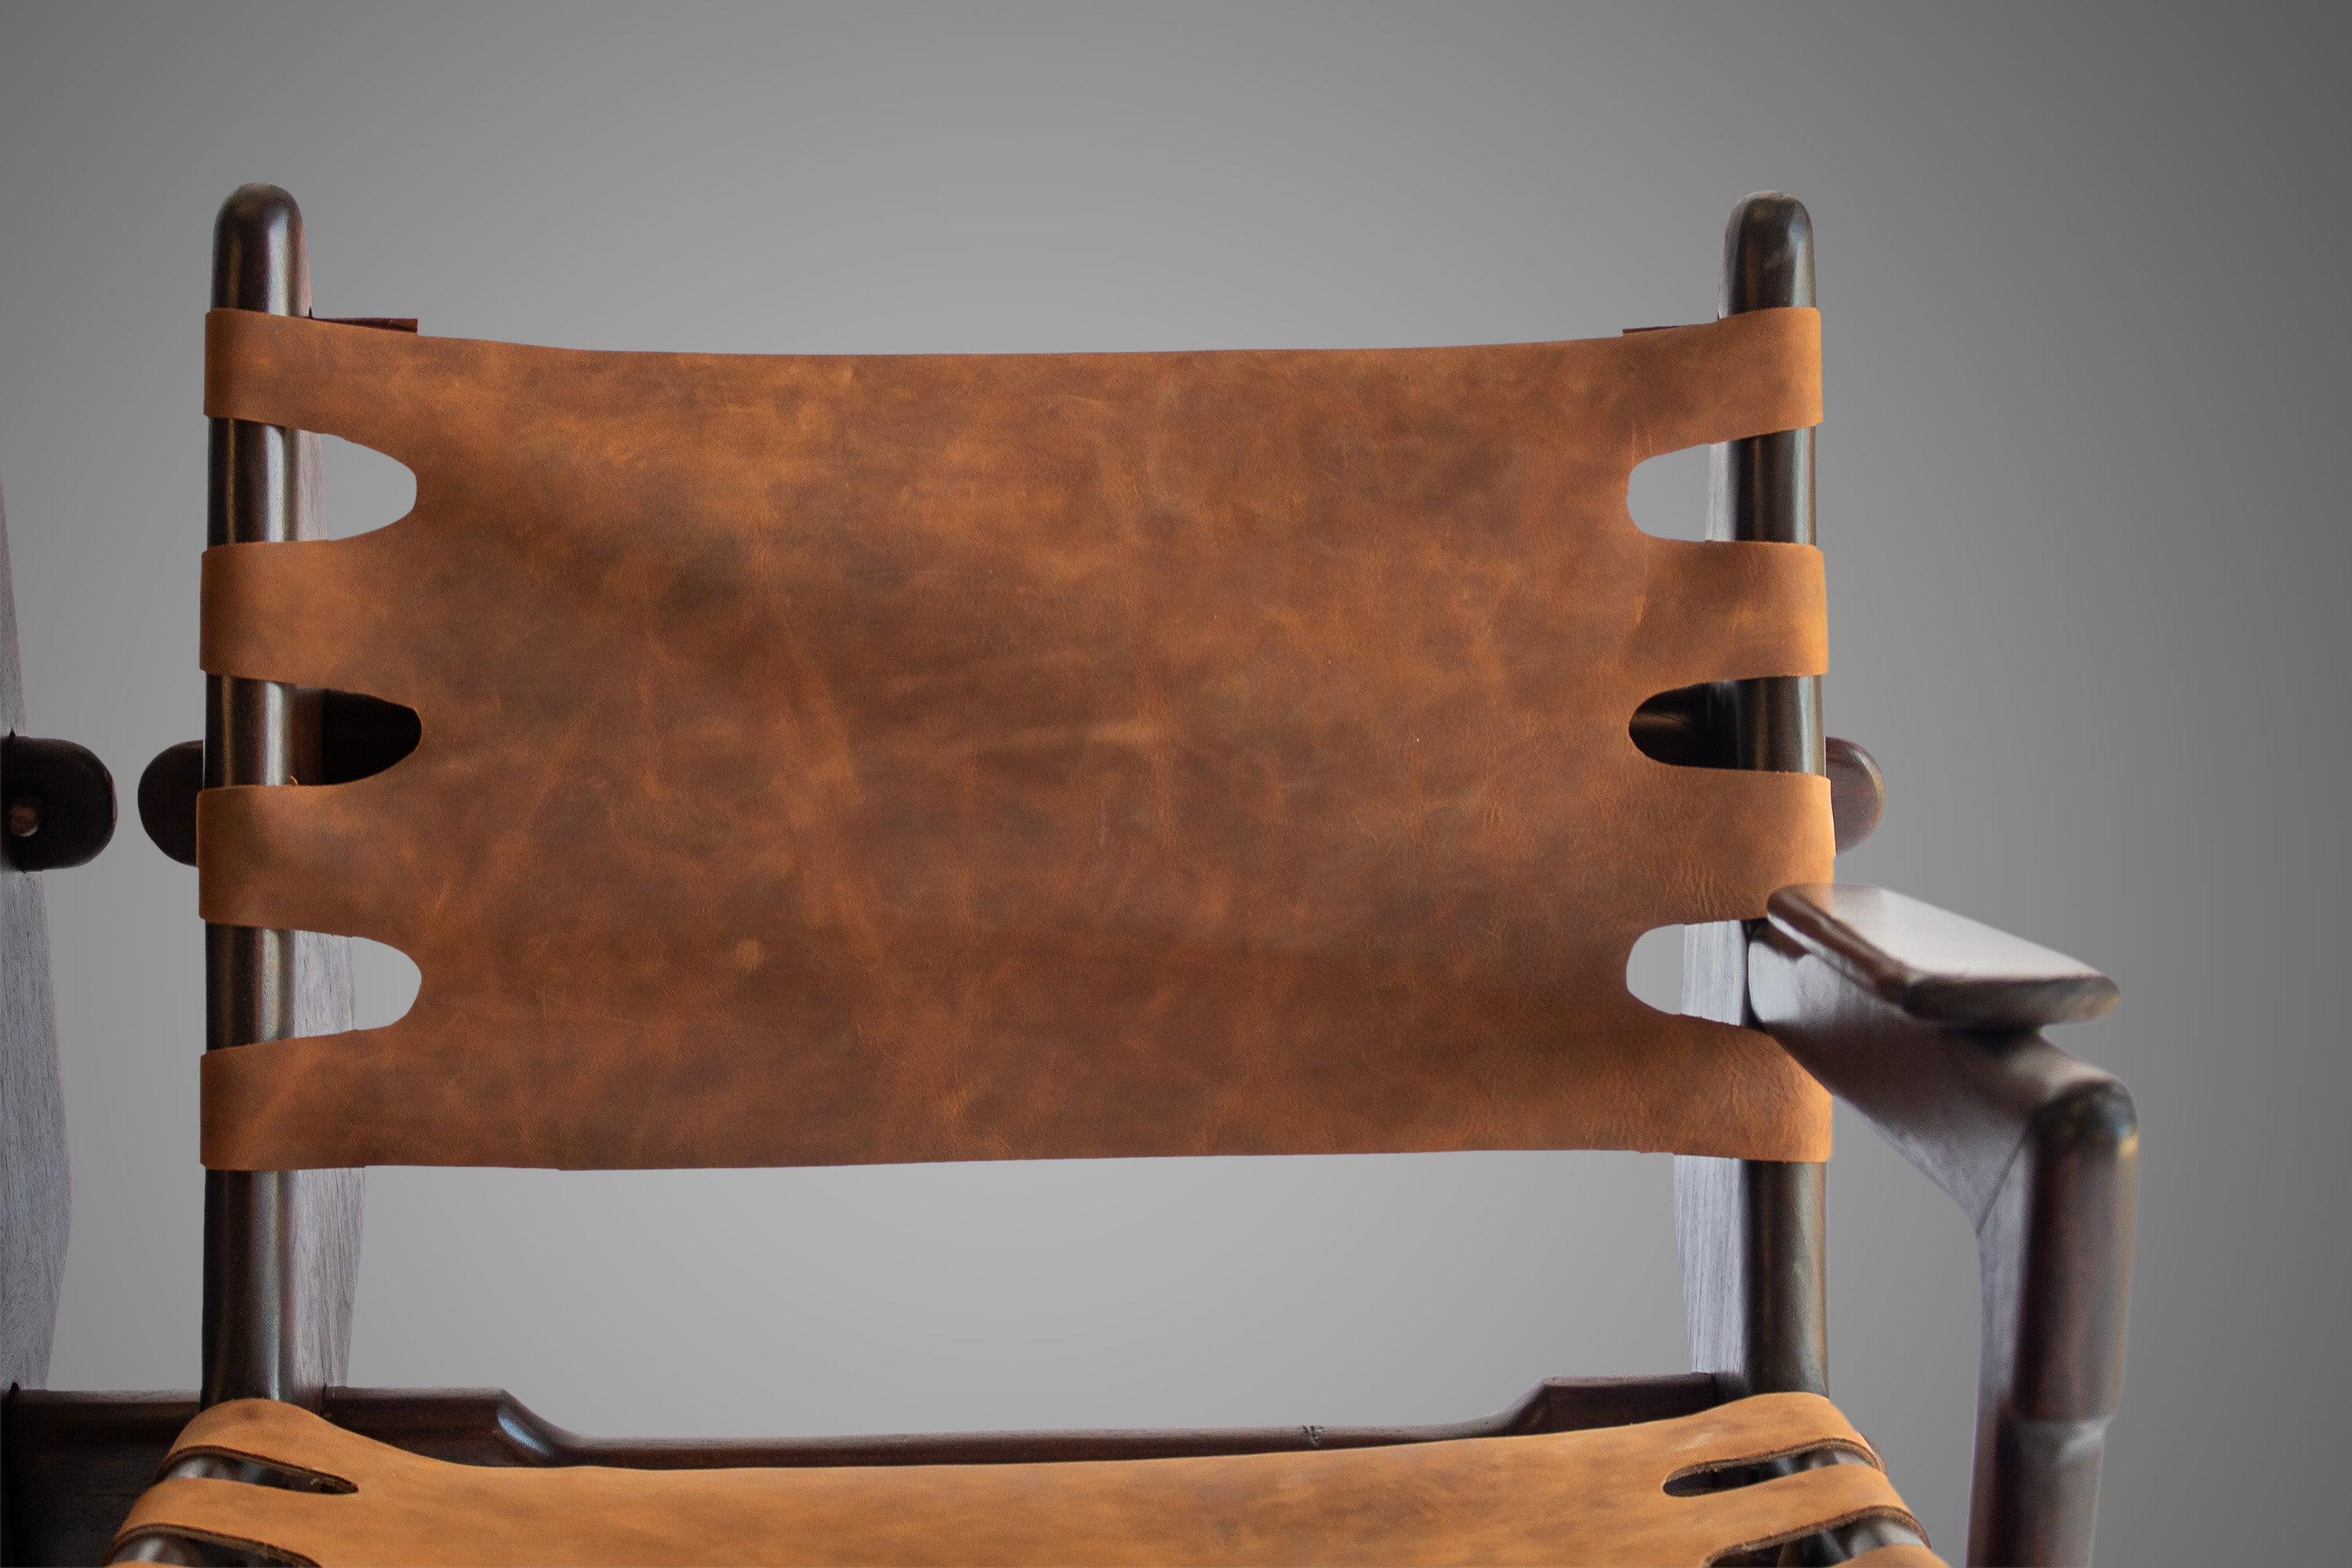 Ecuadorean Loveseat in Solid Fruitwood & Leather by Angel Pazmino, Ecuador, c. 1960's For Sale